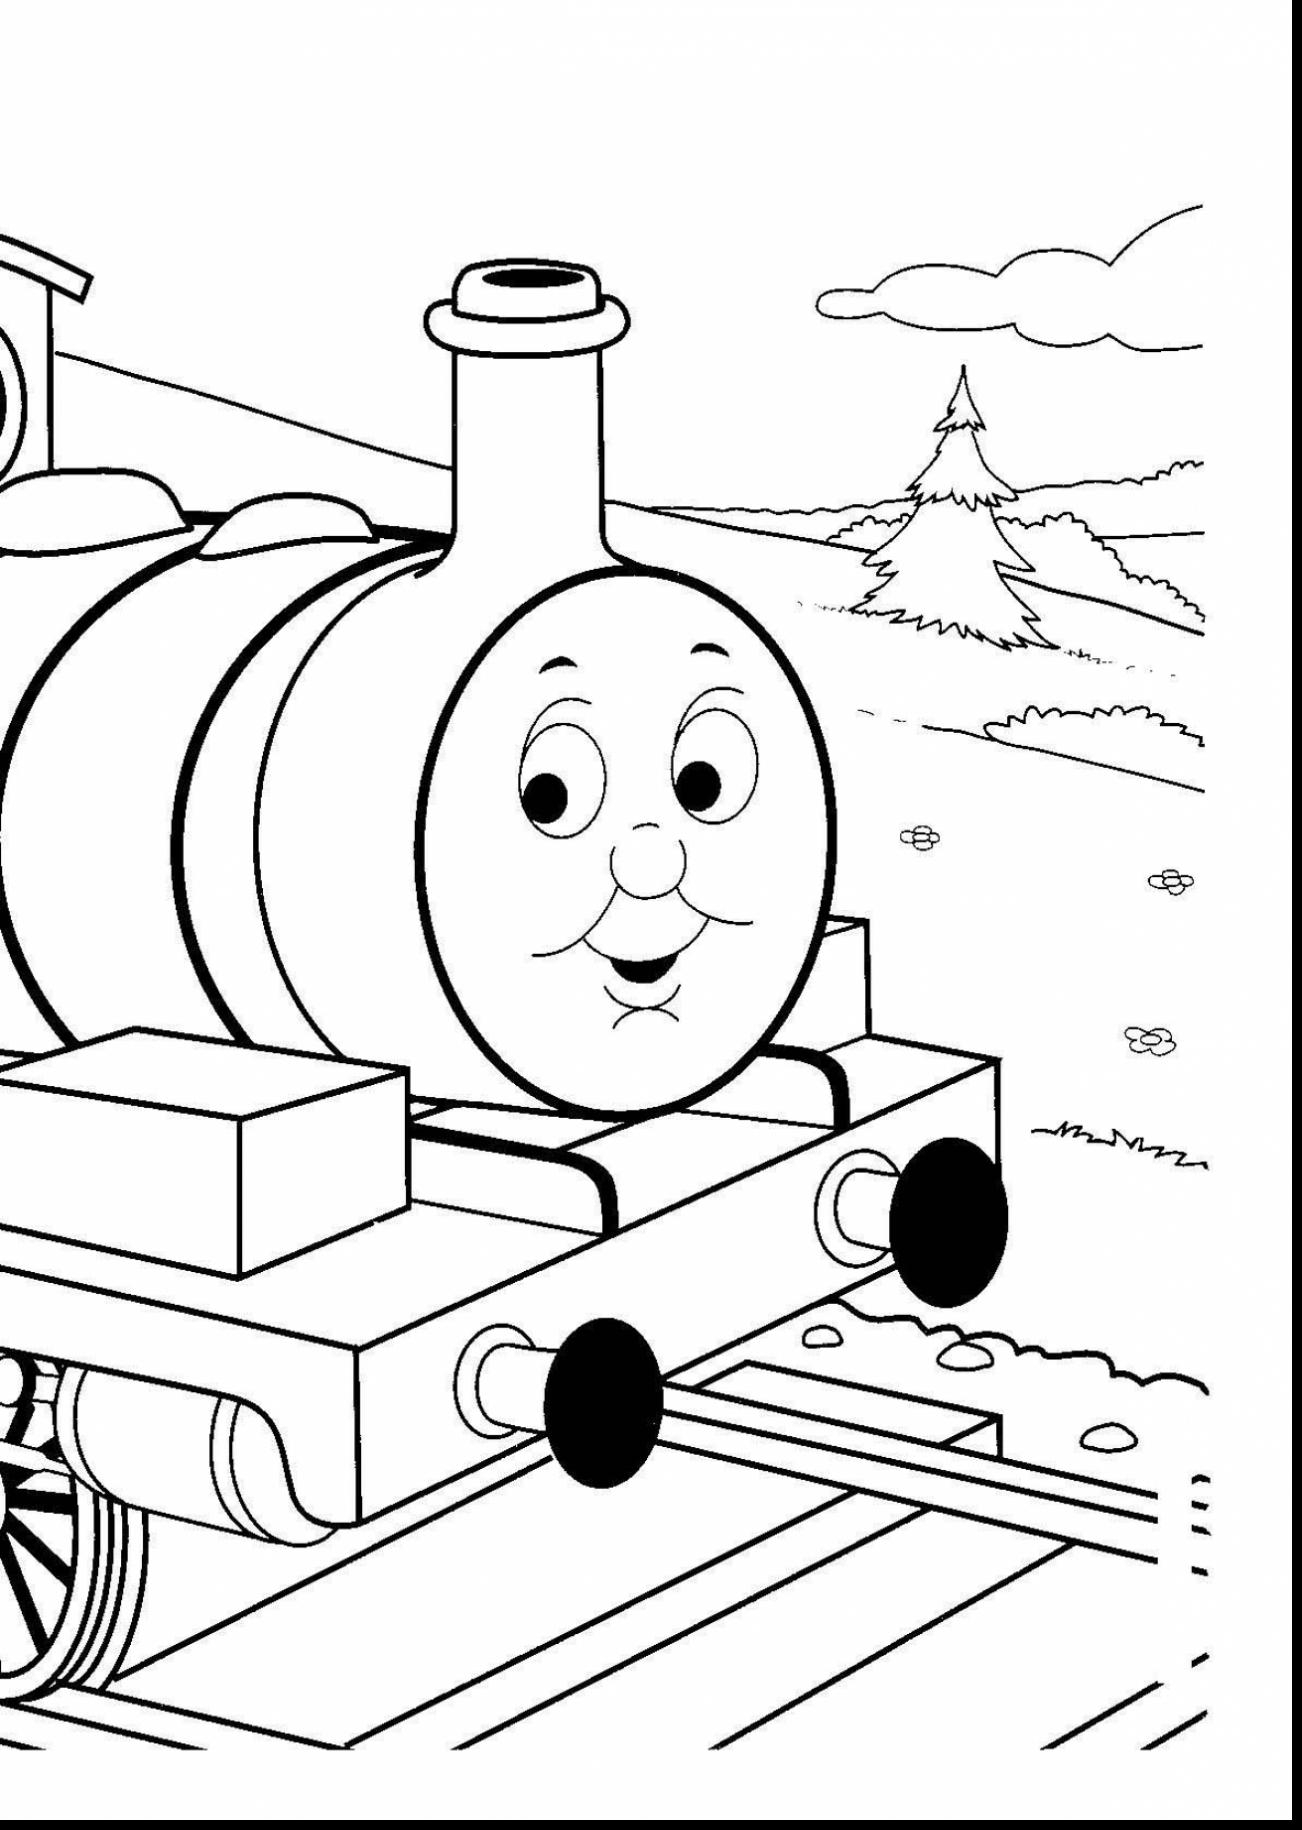 Thomas Coloring Pages Printable Coloring Pages Cooloring Book Thomas The Train Videos Coloringmes